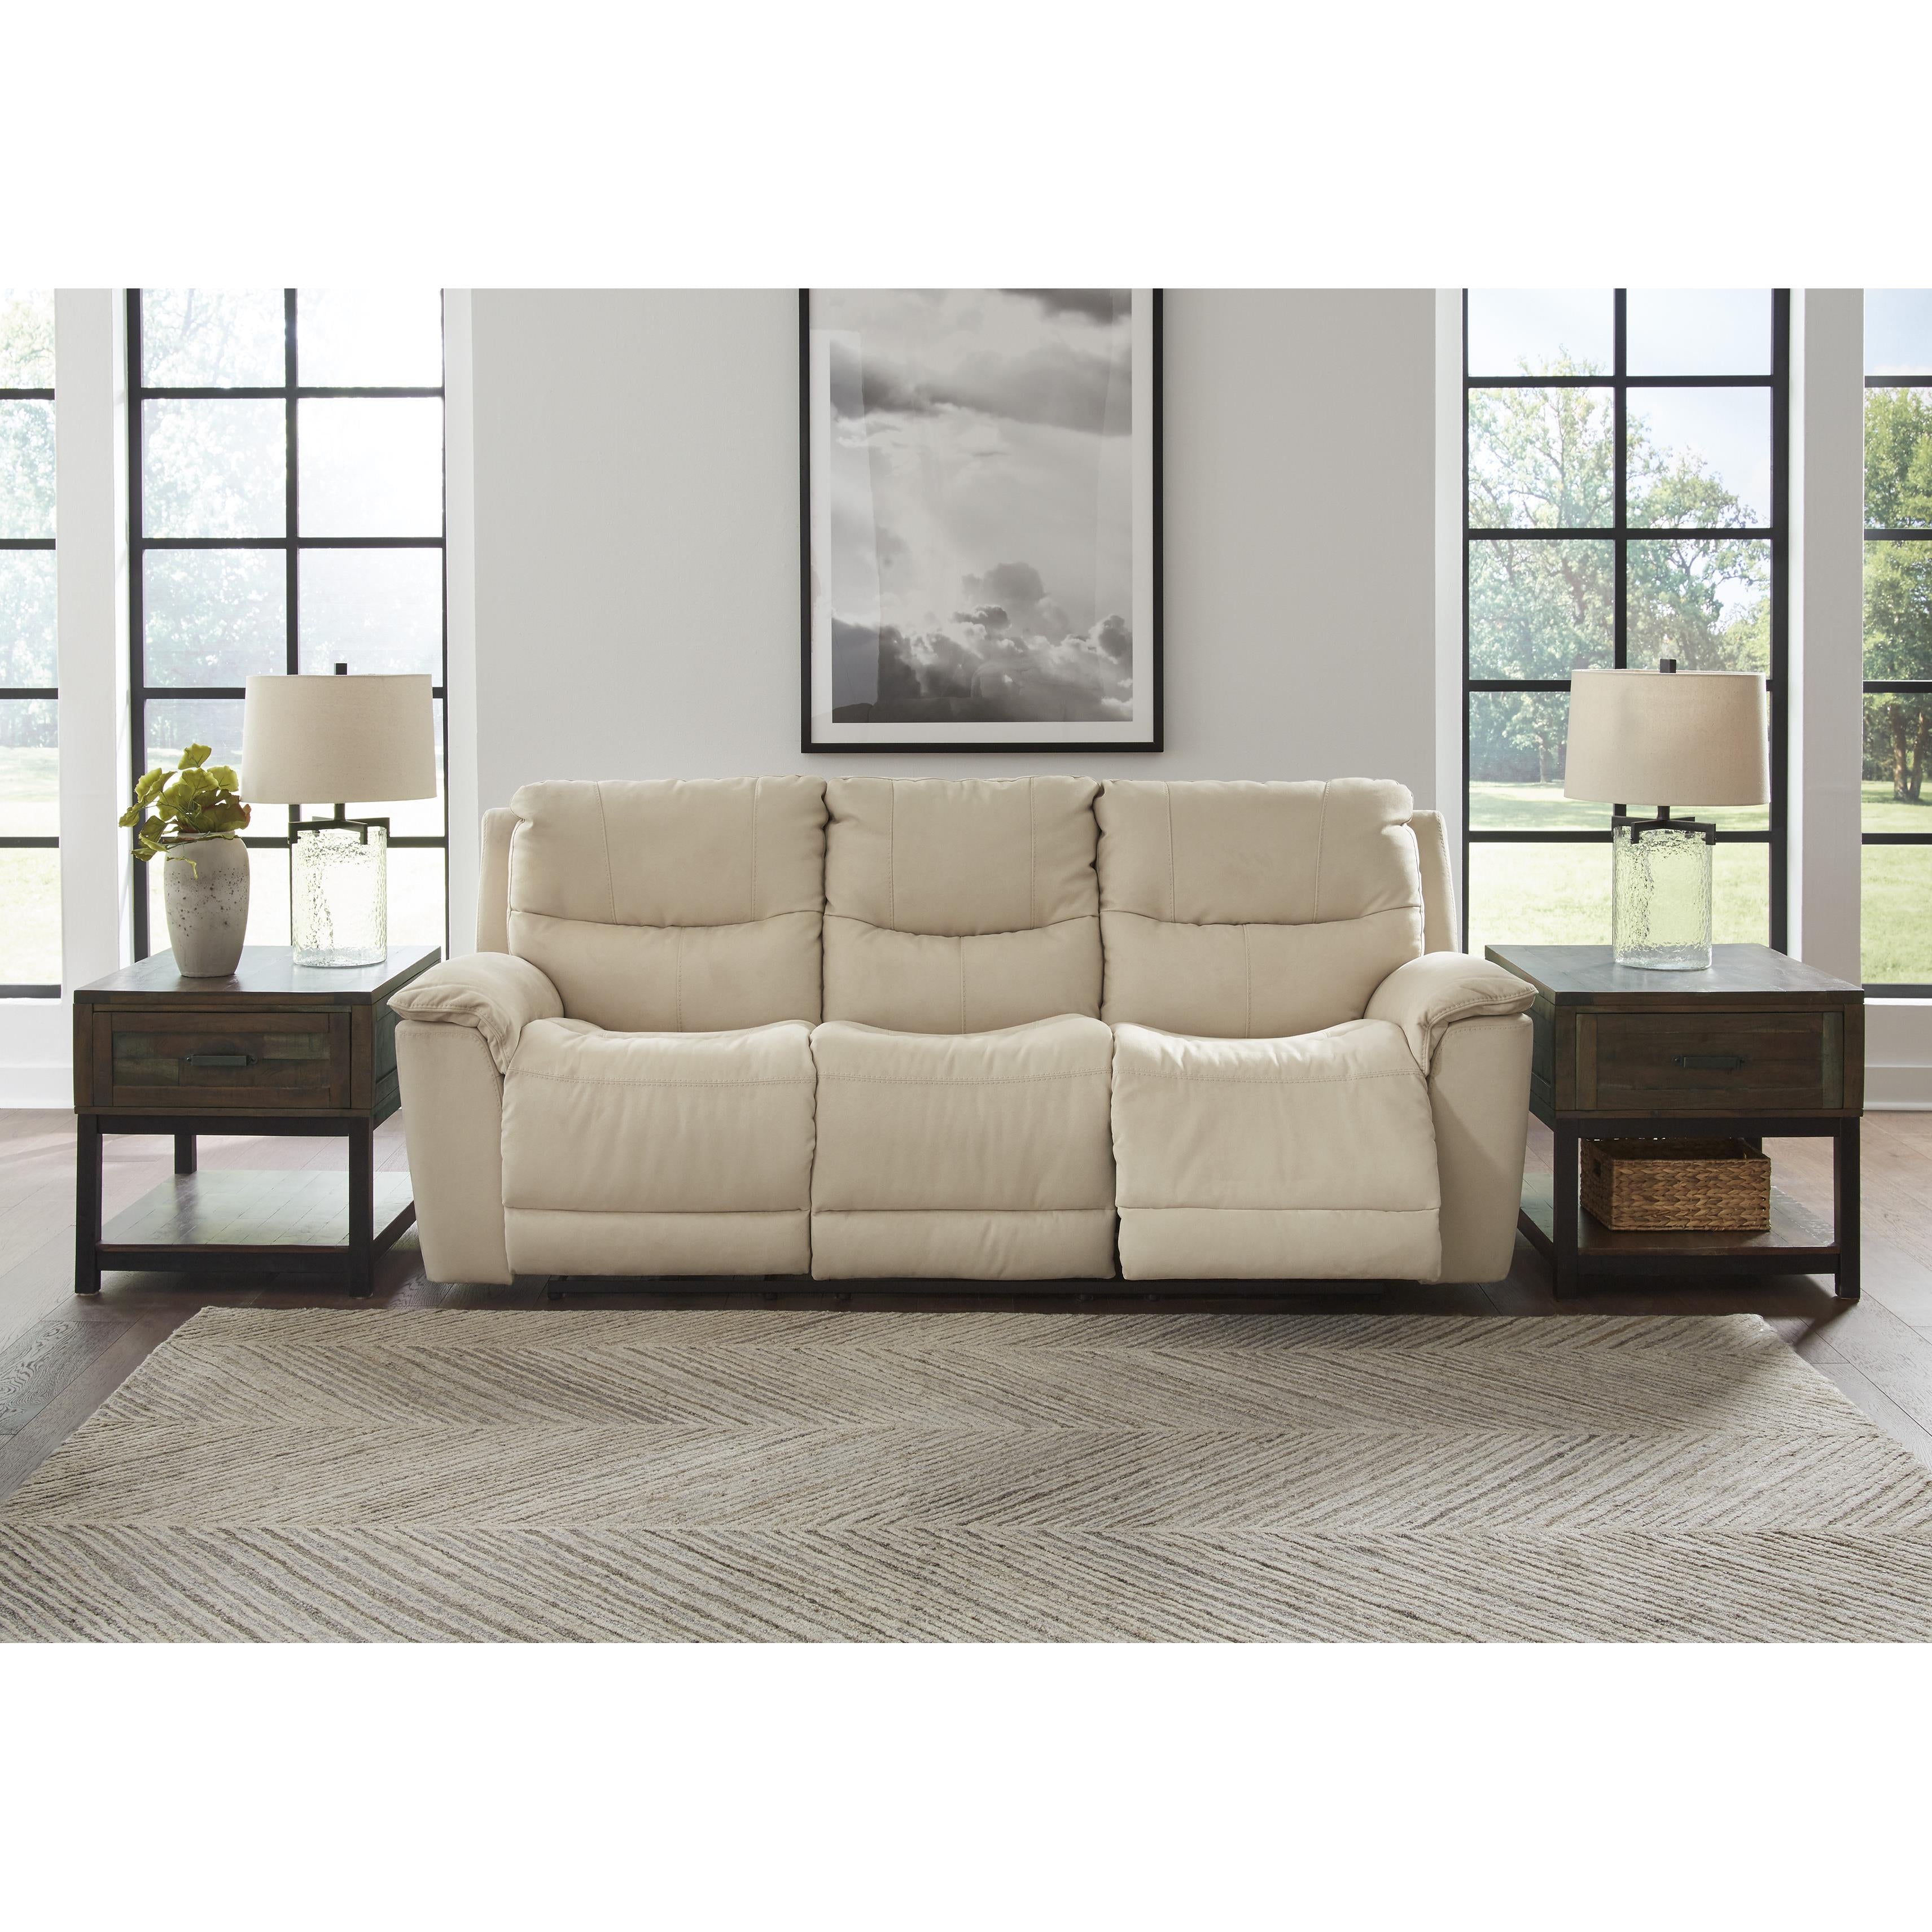 Signature Design by Ashley Next-Gen Gaucho Power Reclining Leather Look Sofa 6080715 IMAGE 5